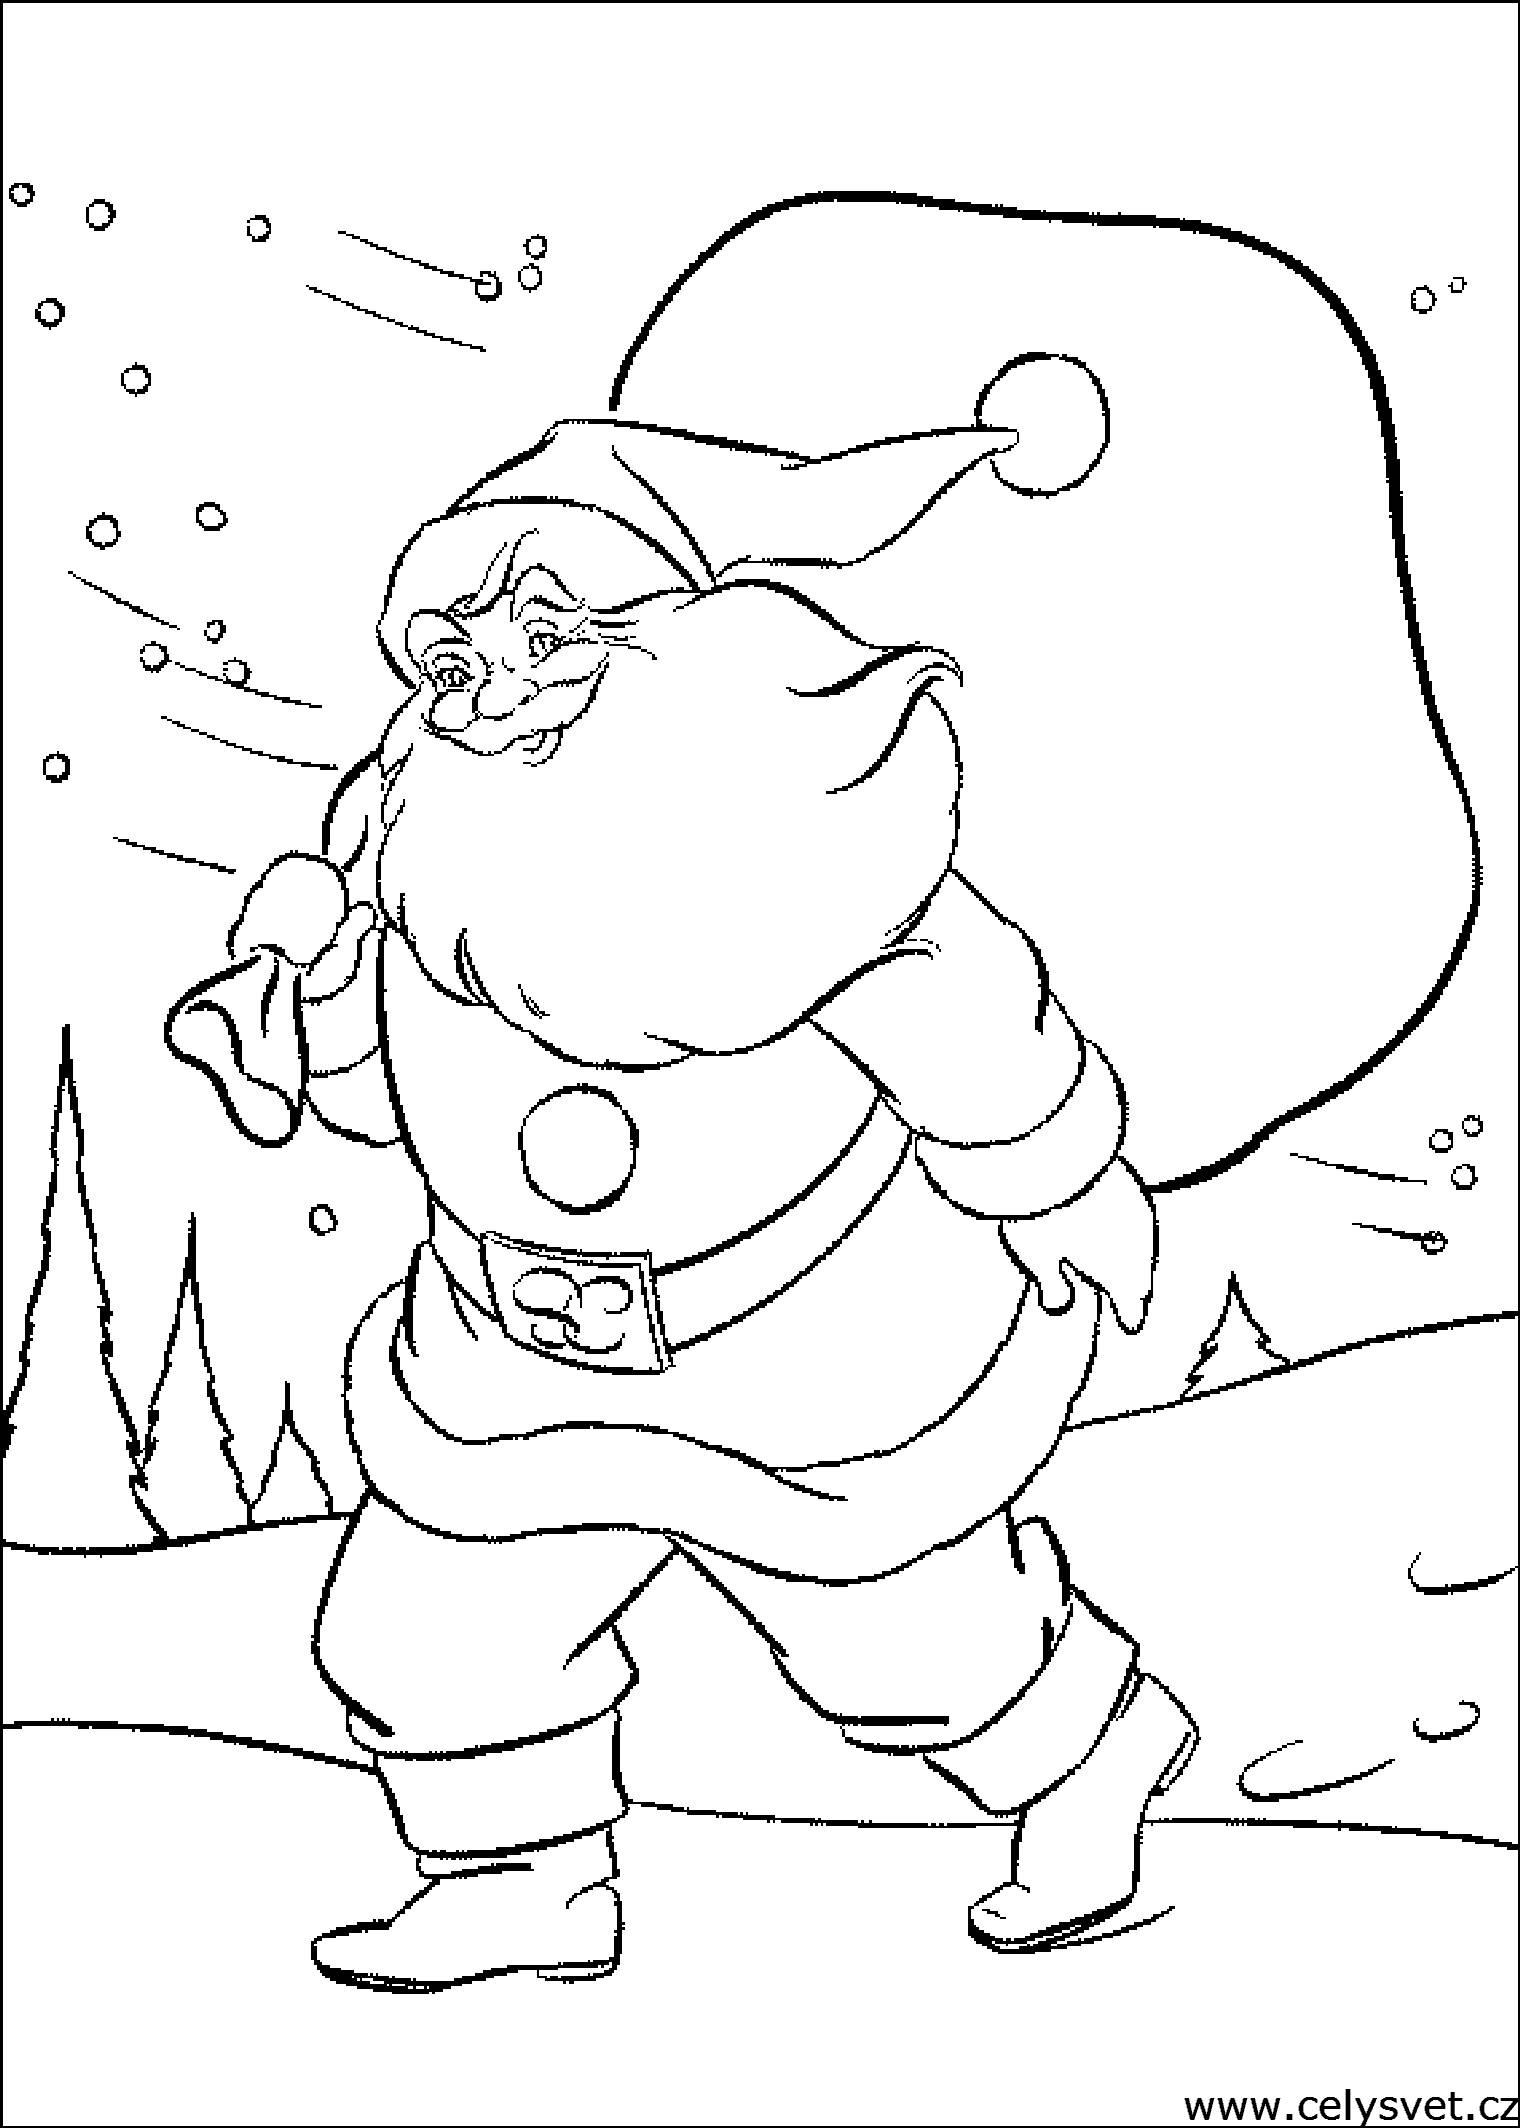 Coloring pages for the new year